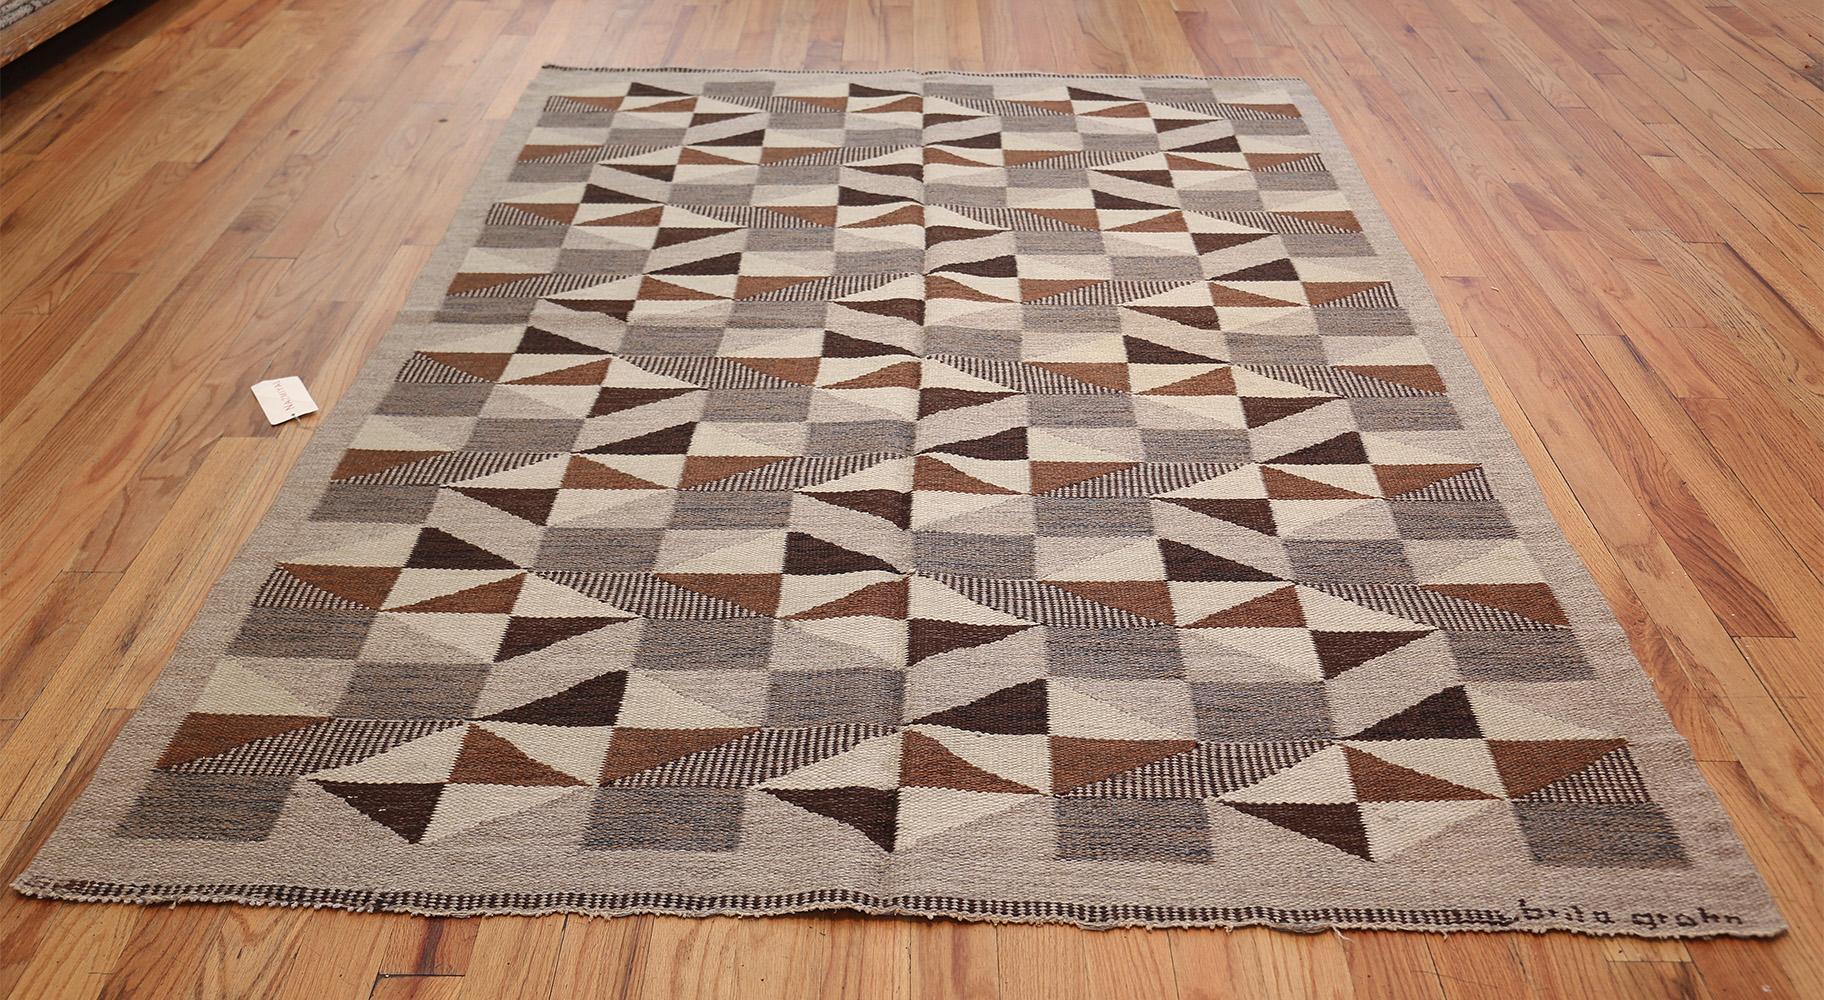 Swedish rug, Scandinavia, mid-20th century. This Minimalist carpet transforms simple half-square, diamond and quarter-square motifs into a graceful geometric pattern with meandering rows of zigzags and layers of secondary figures formed by the